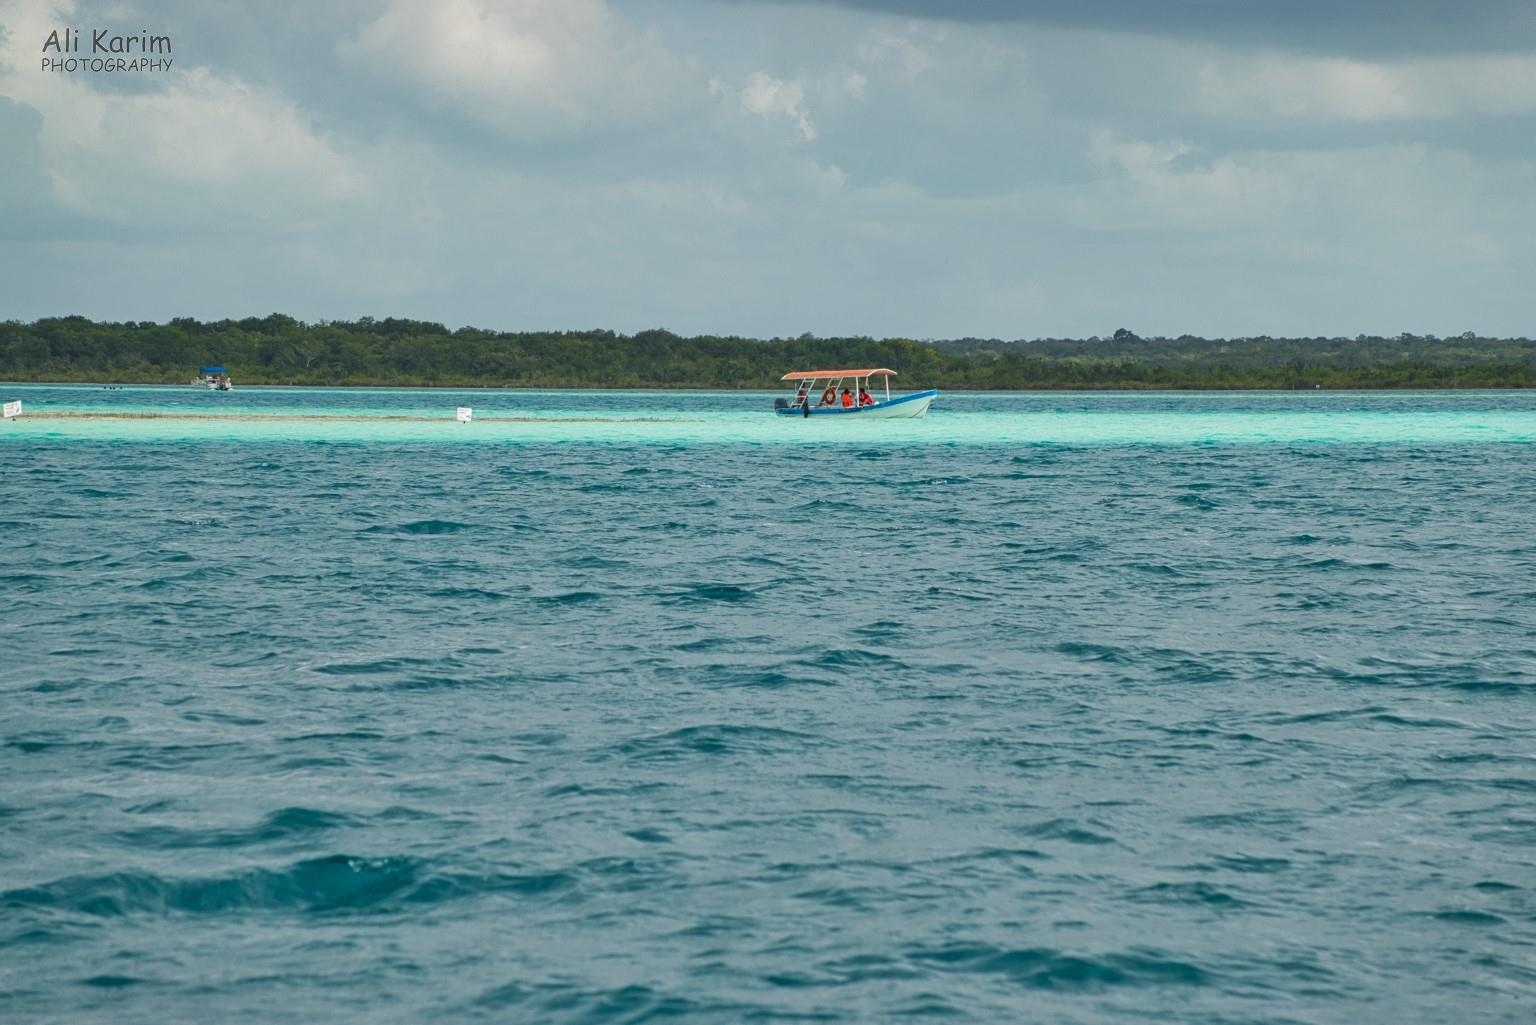 Bacalar & Mahahual, Mexico, Jan 2020, Colors changed with the amount of sunlight